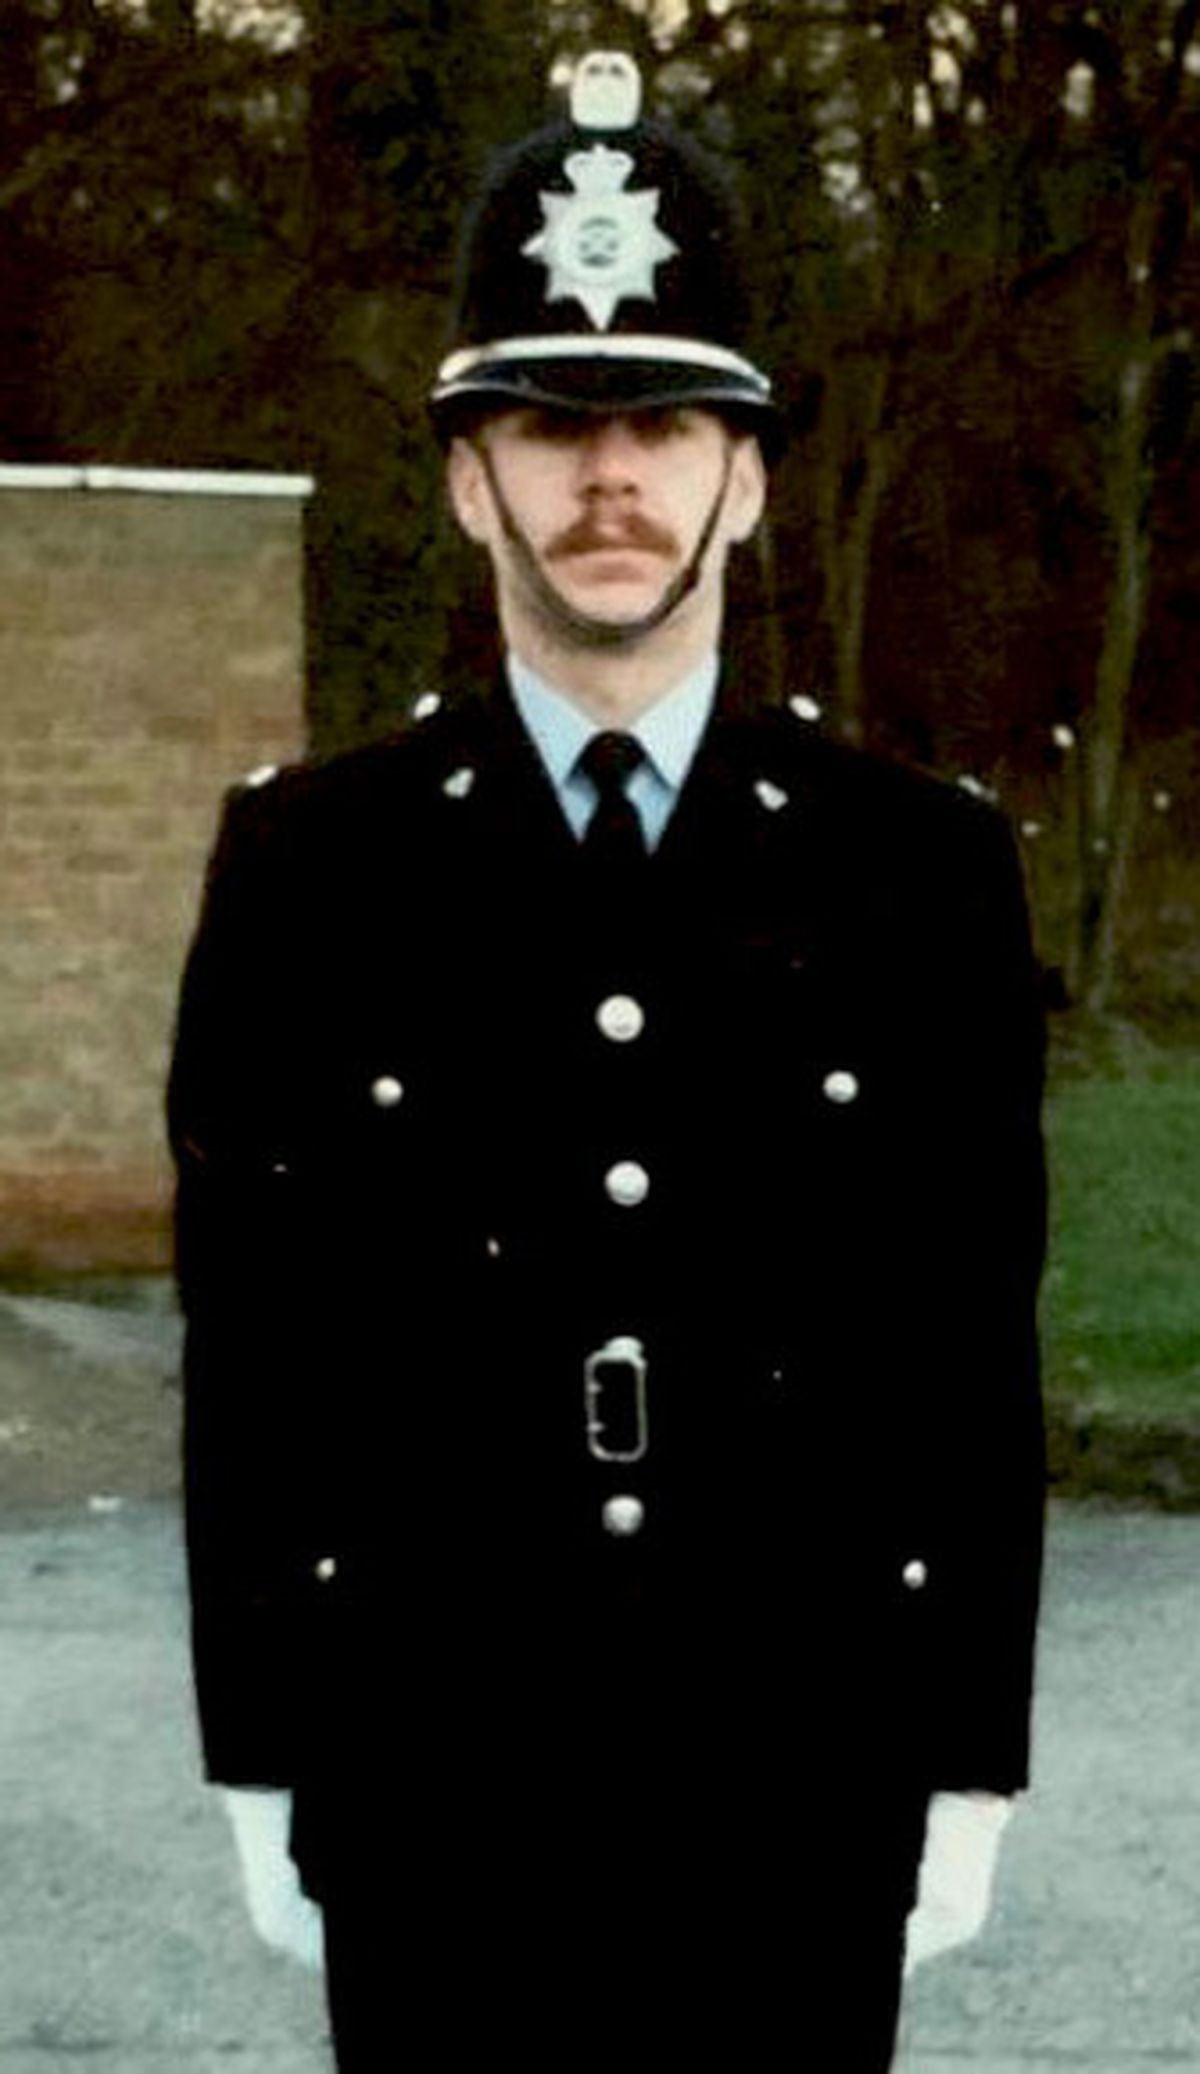 Pc Kelsall was based in Cannock